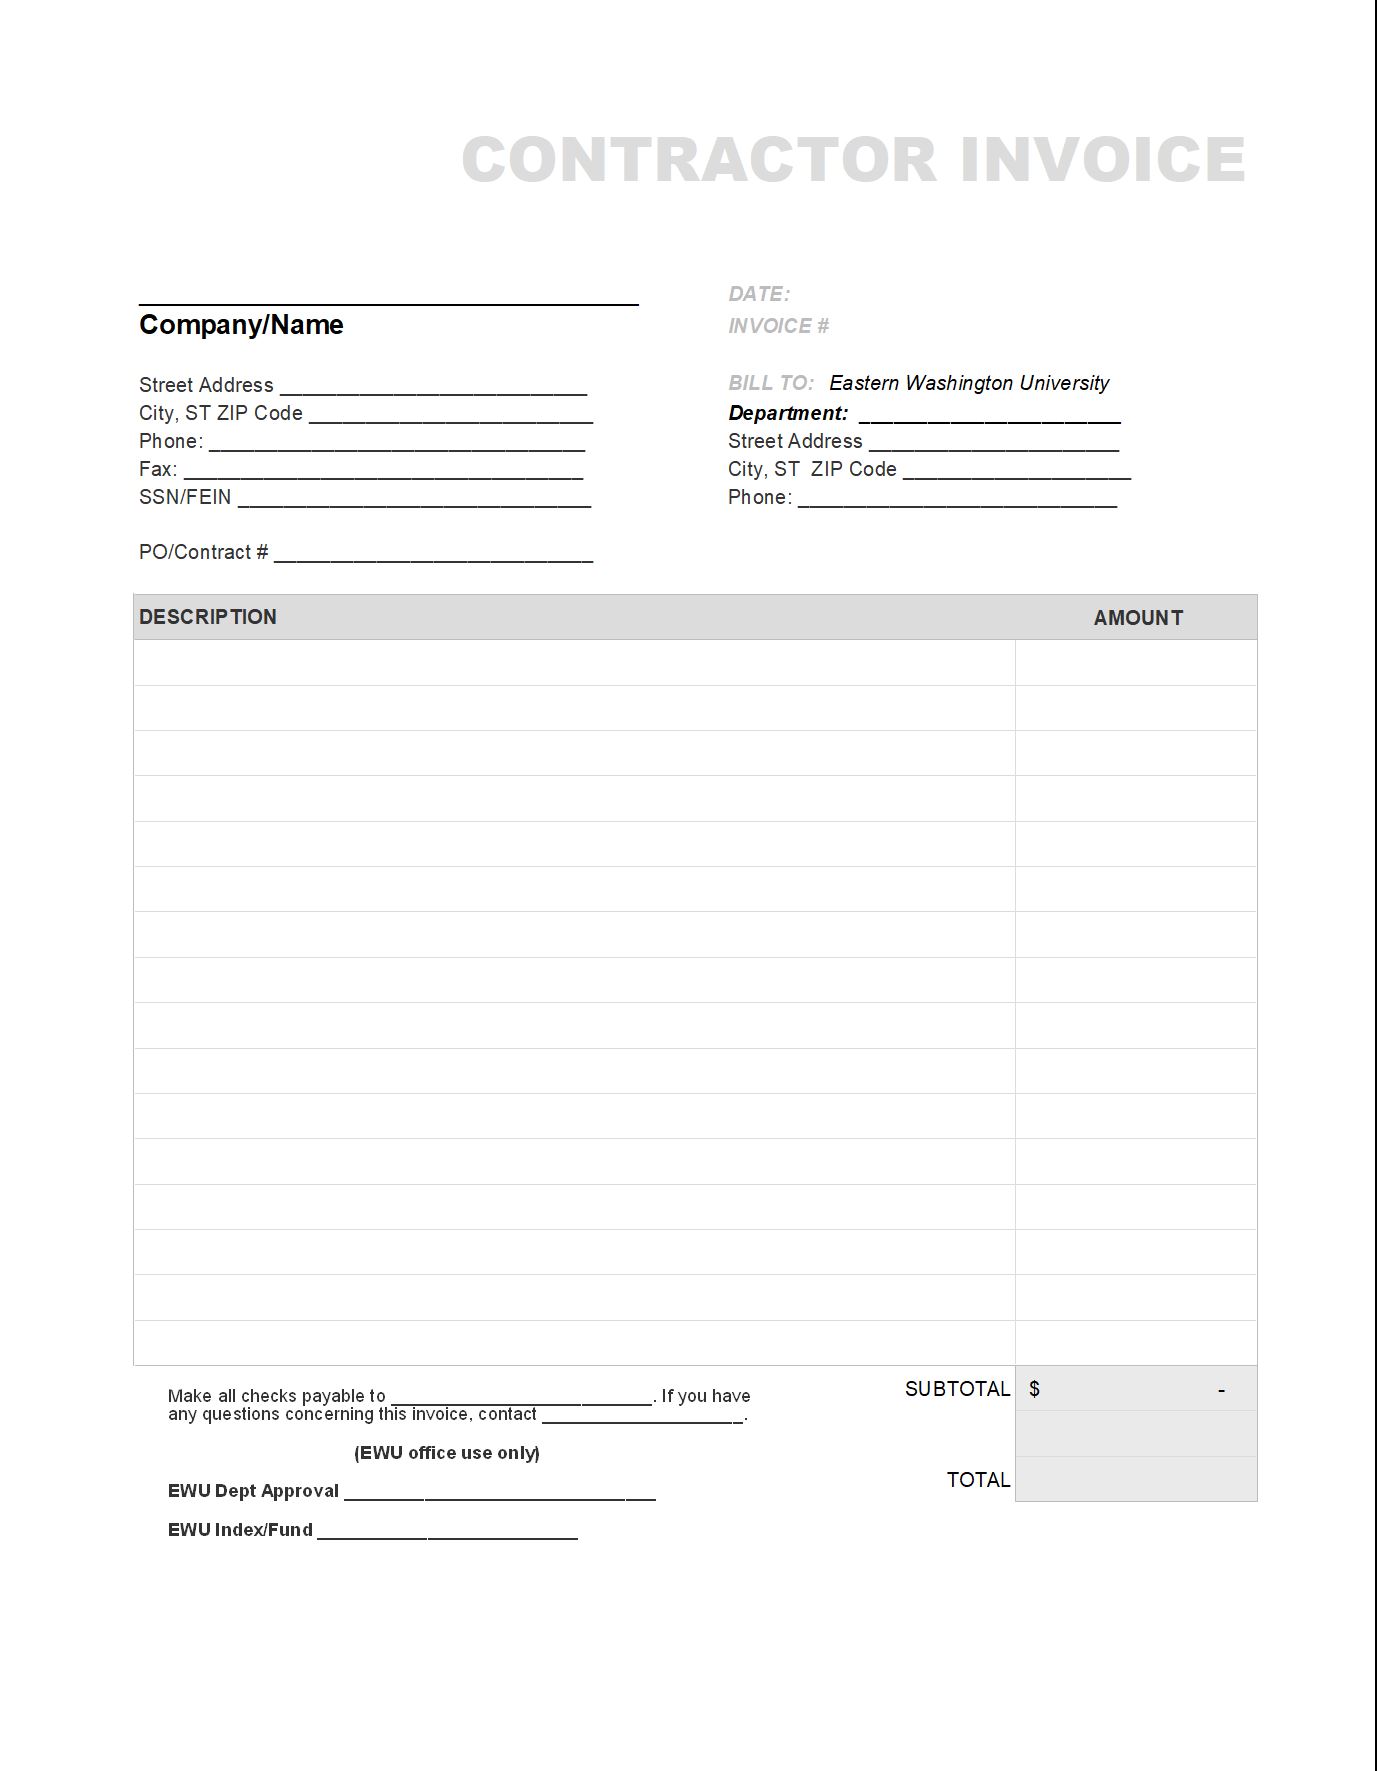 23 Independent Contractor Invoice Templates (FREE) Inside Contractor Invoices Templates